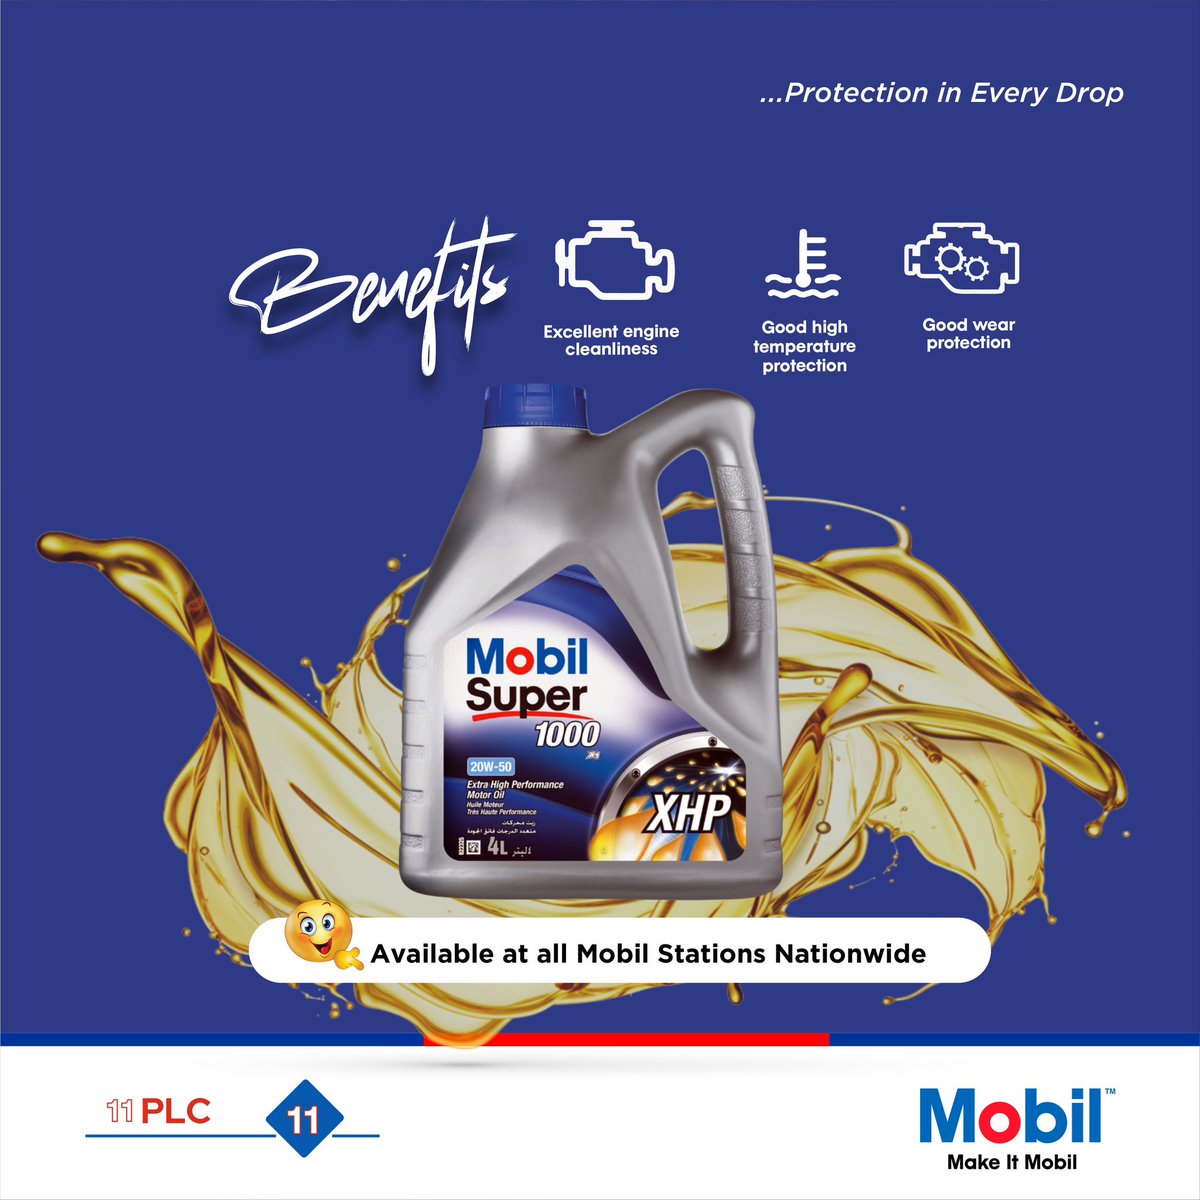 The Mobil Super 1000 range of lubricants are premium mineral engine oils, designed to provide a high level of protection and performance.

#mobilsuperoil #mobillubricantes #carmaintenance #tuesday